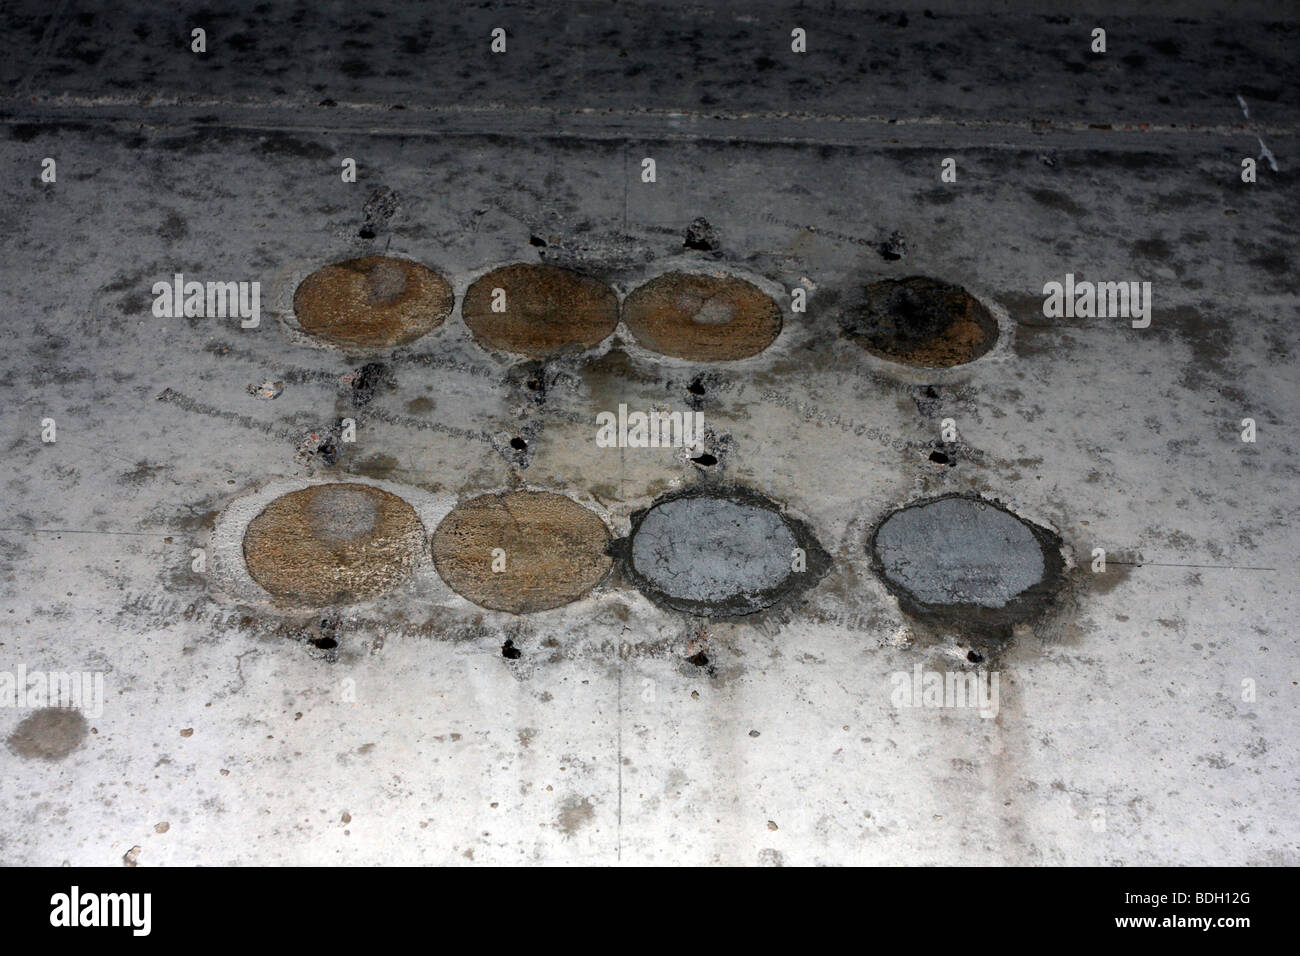 A row of post-tensioning plug holes on concrete face, showing discoloration and staining. Stock Photo